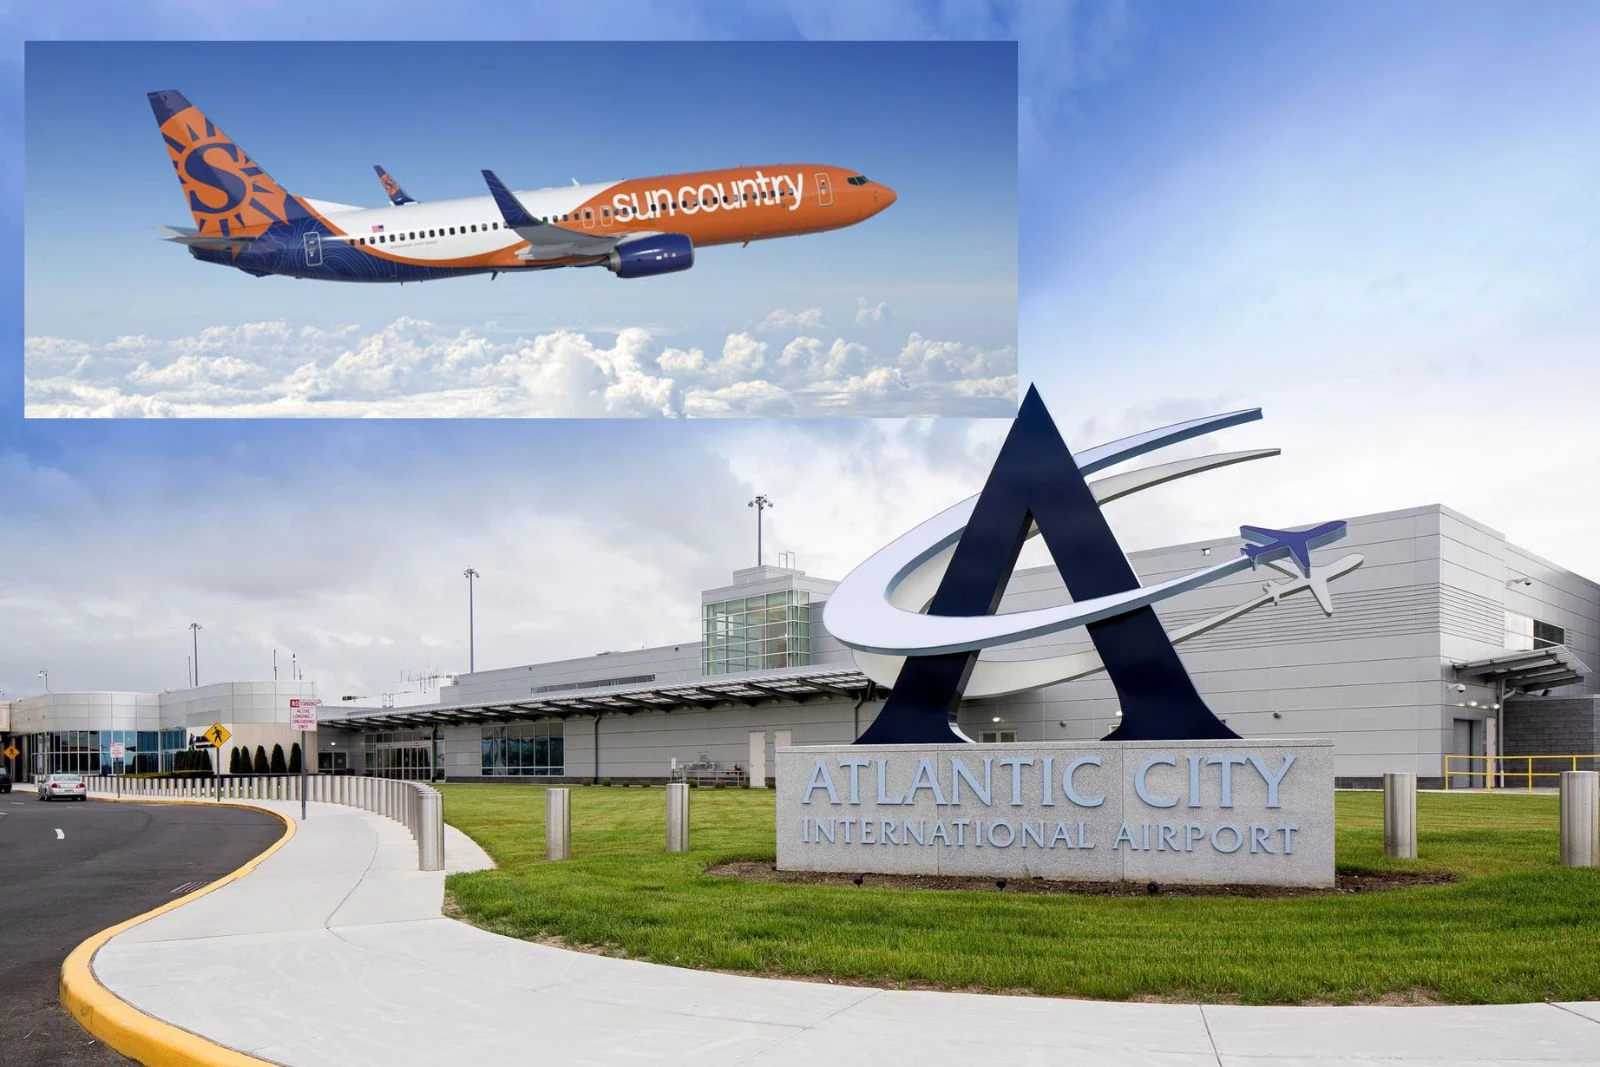 West Coast flights from Atlantic City, NJ, are coming in 2023